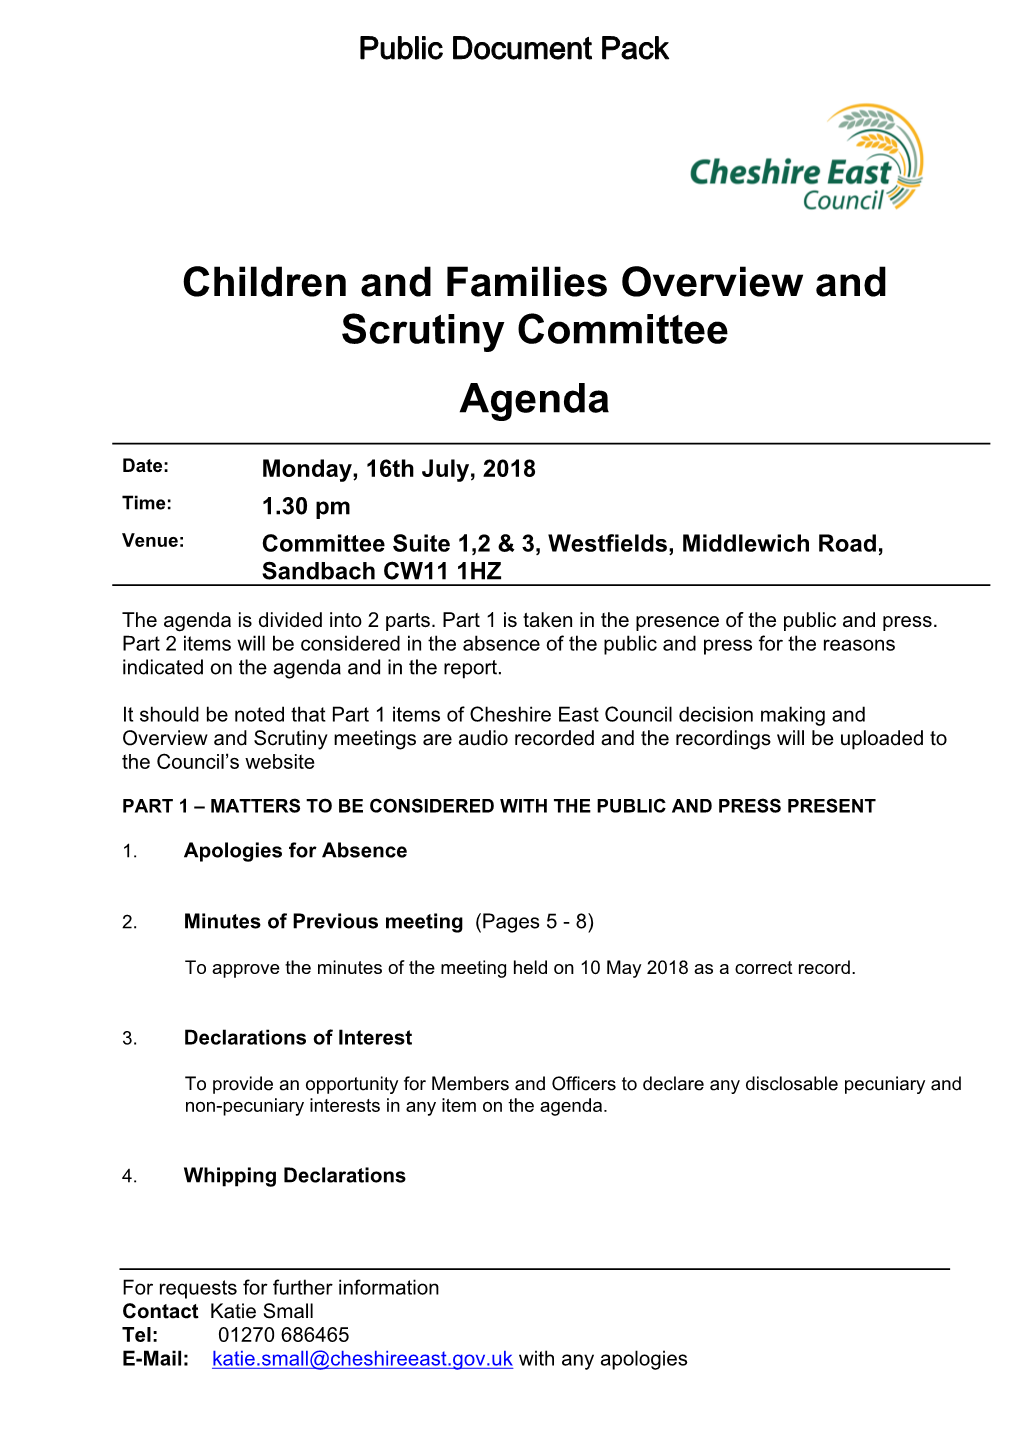 (Public Pack)Agenda Document for Children and Families Overview